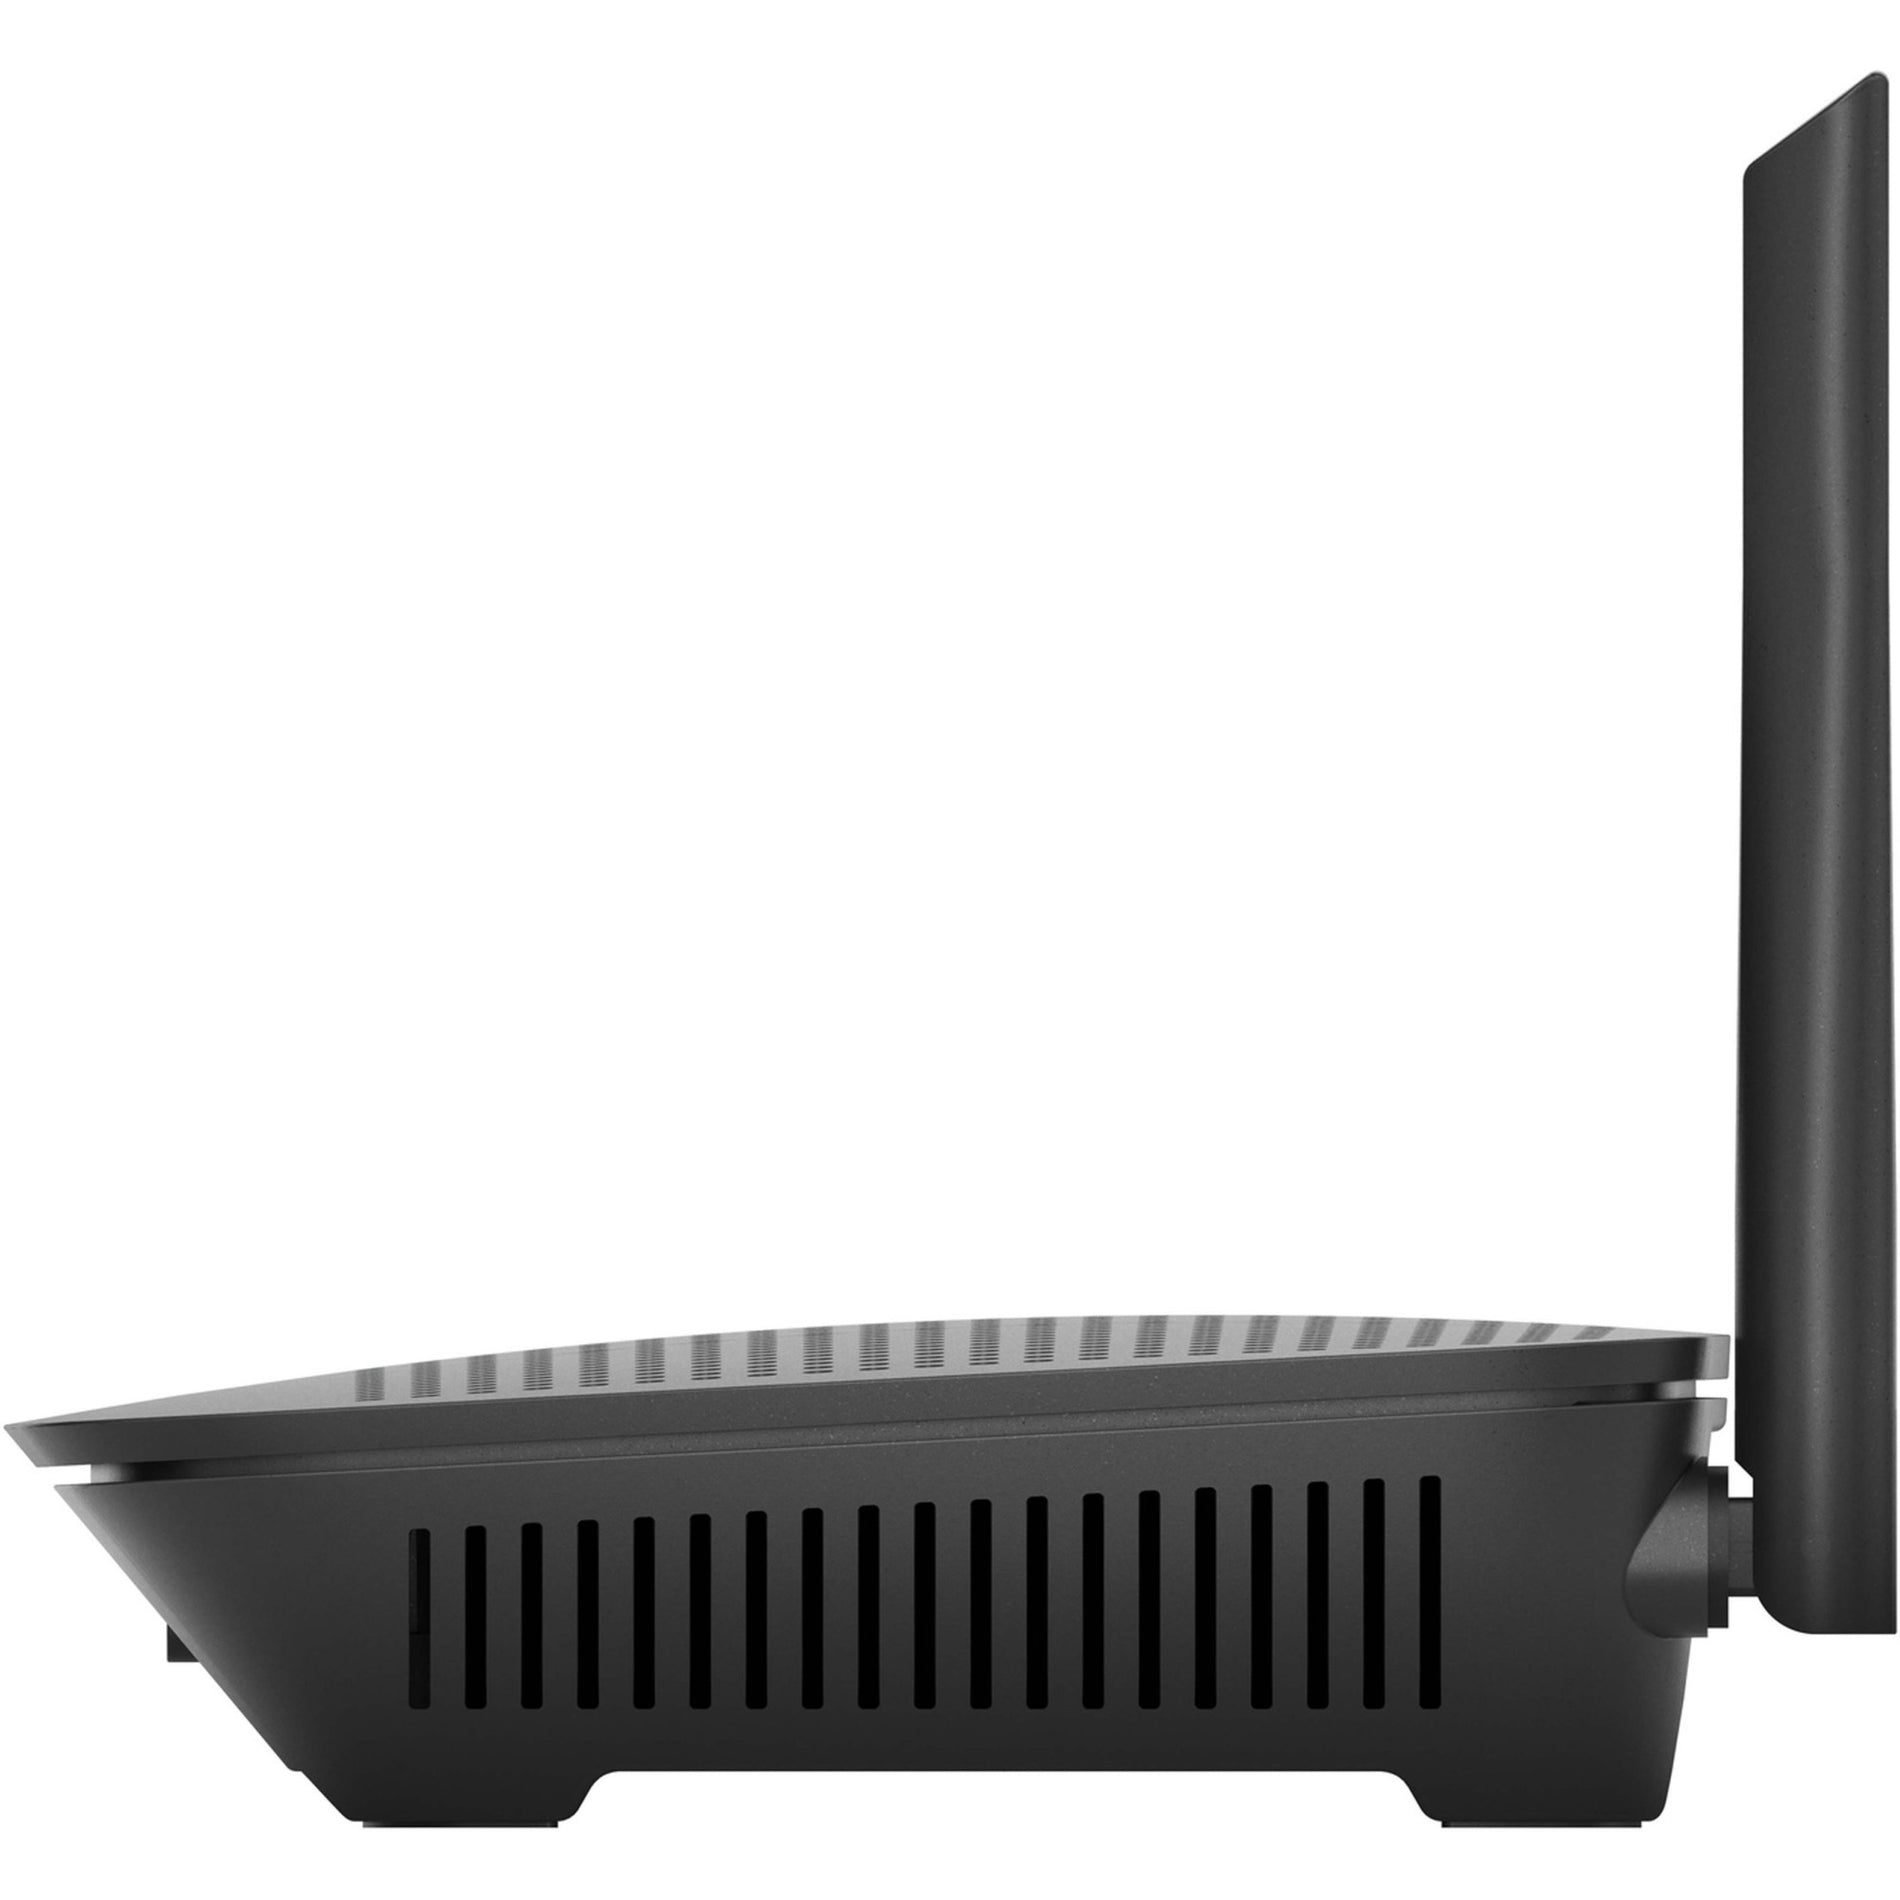 Linksys MR6350 Max-Stream AC 1300 Dual-Band Mesh Wi-Fi 5 Router, Gigabit Ethernet, Alexa Supported